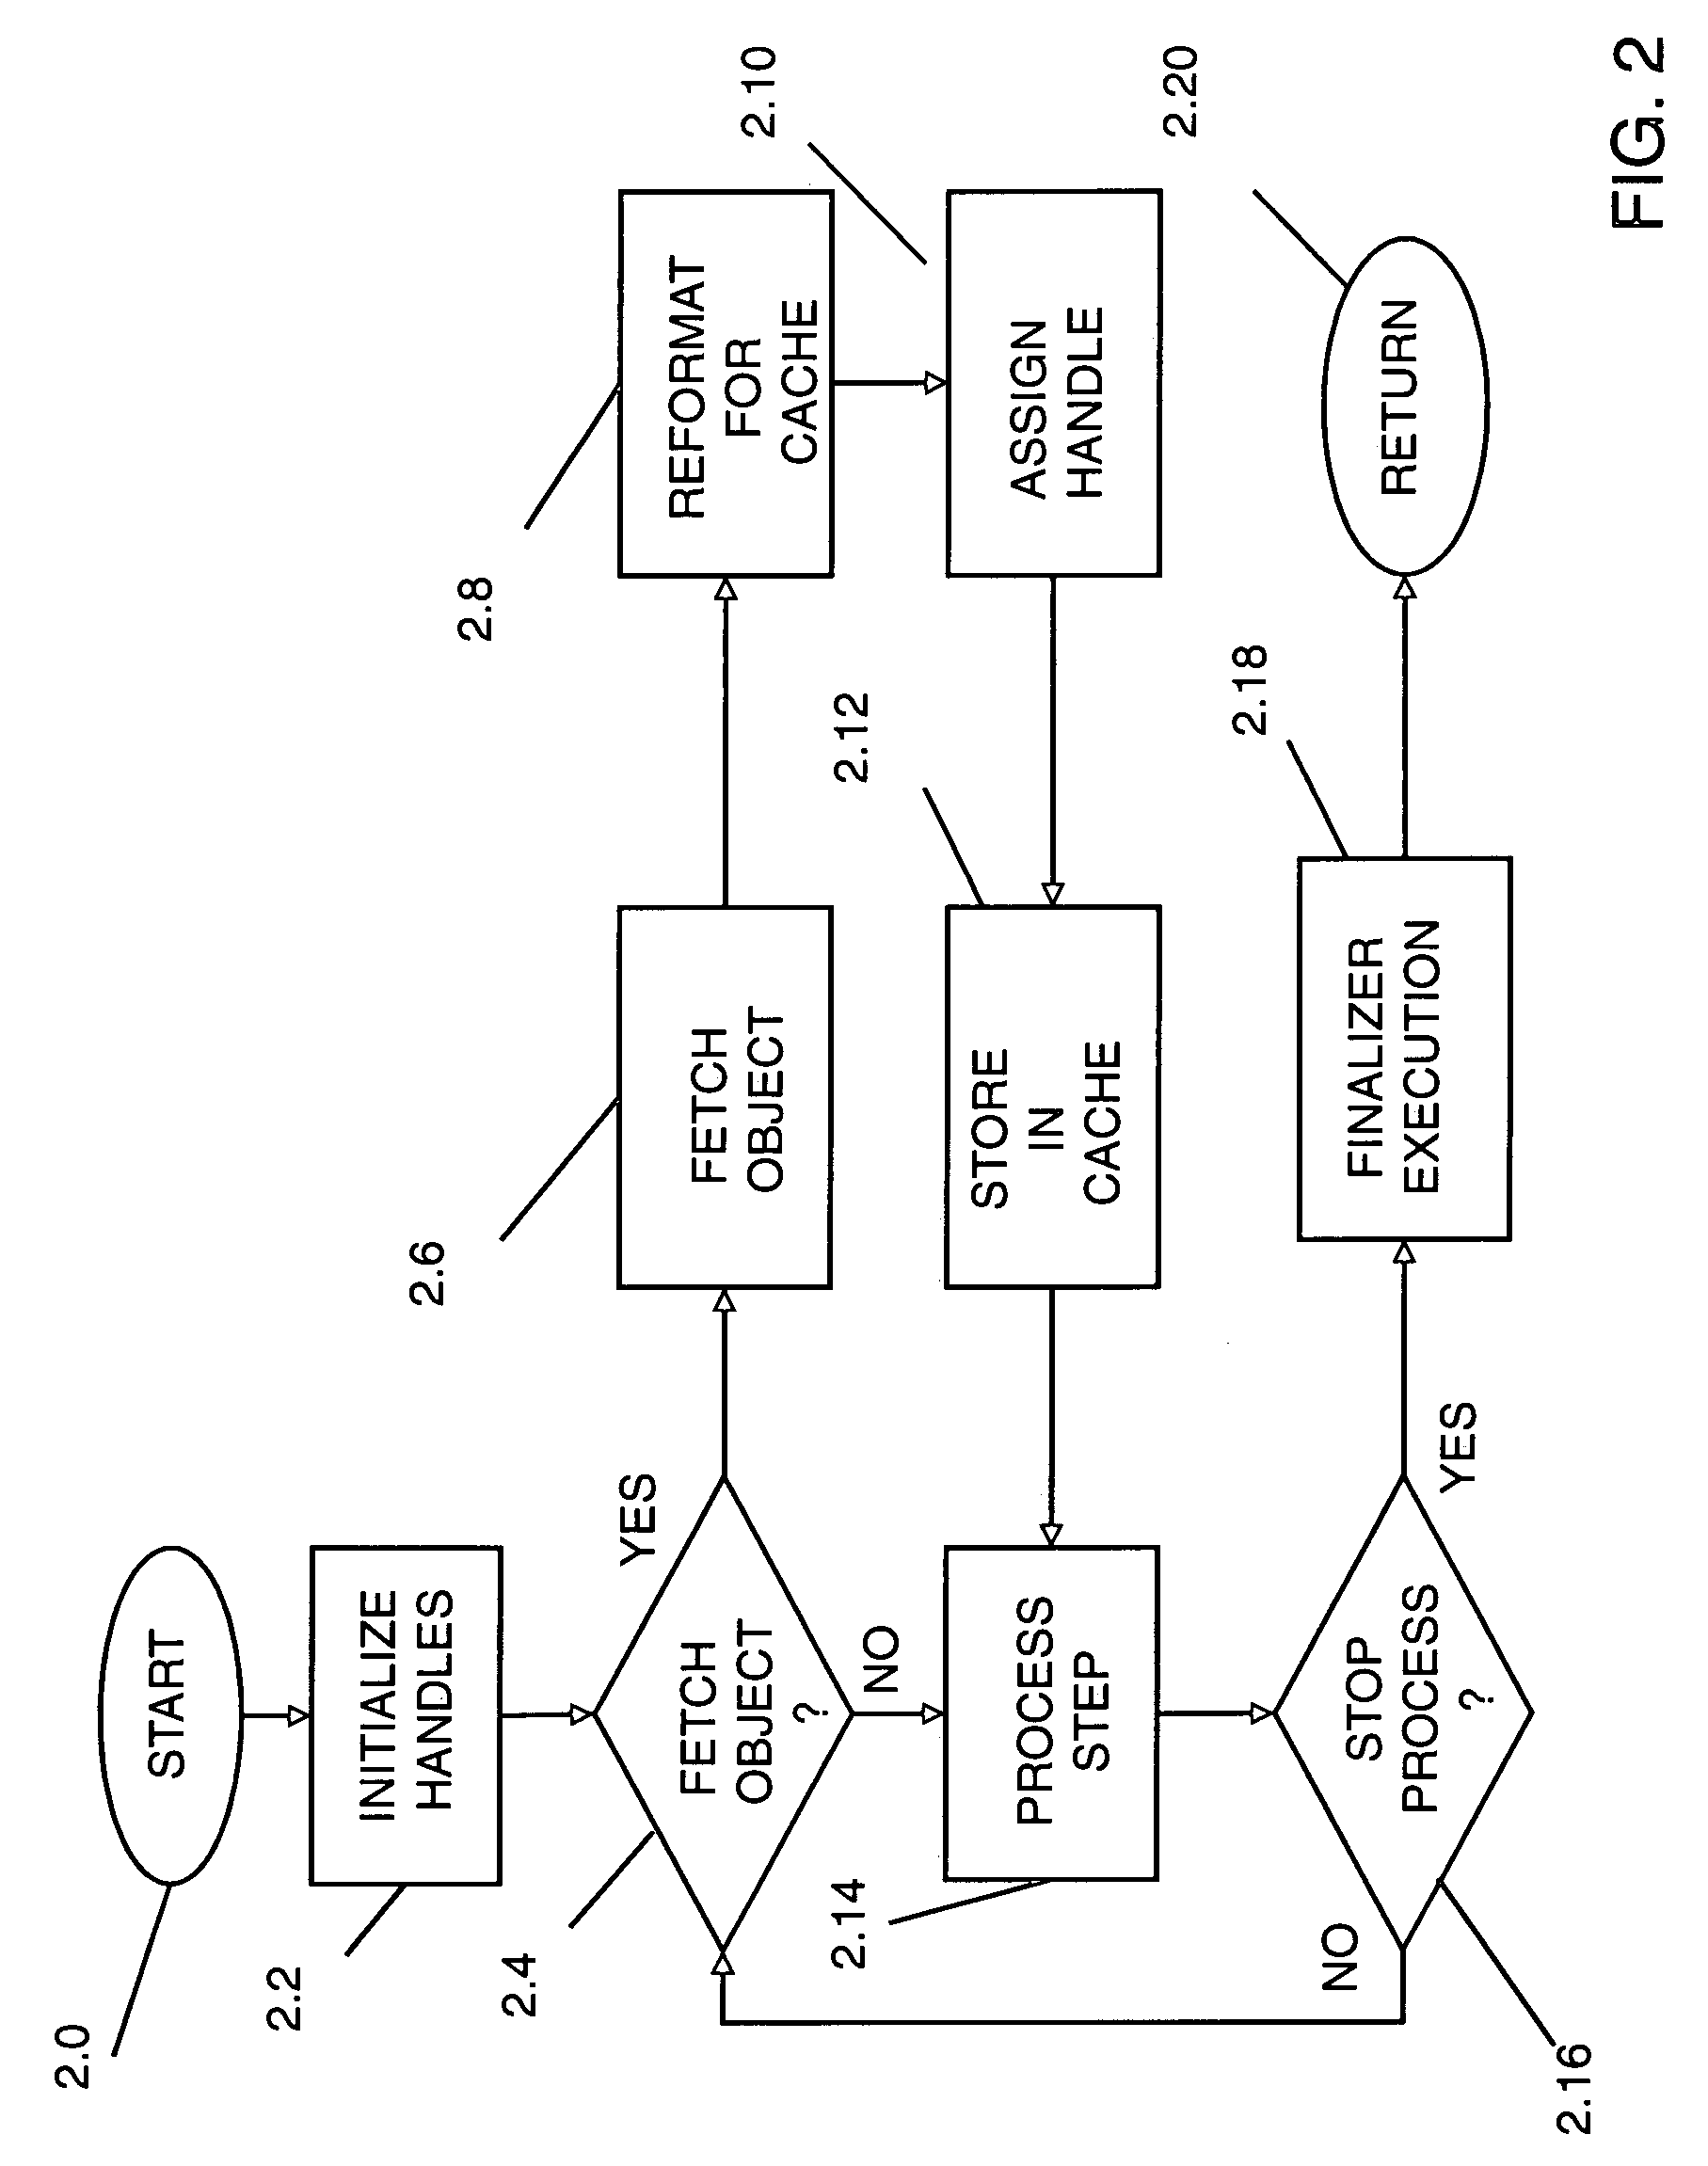 Method, system and computer-readable media for managing software object handles in a dual threaded environment